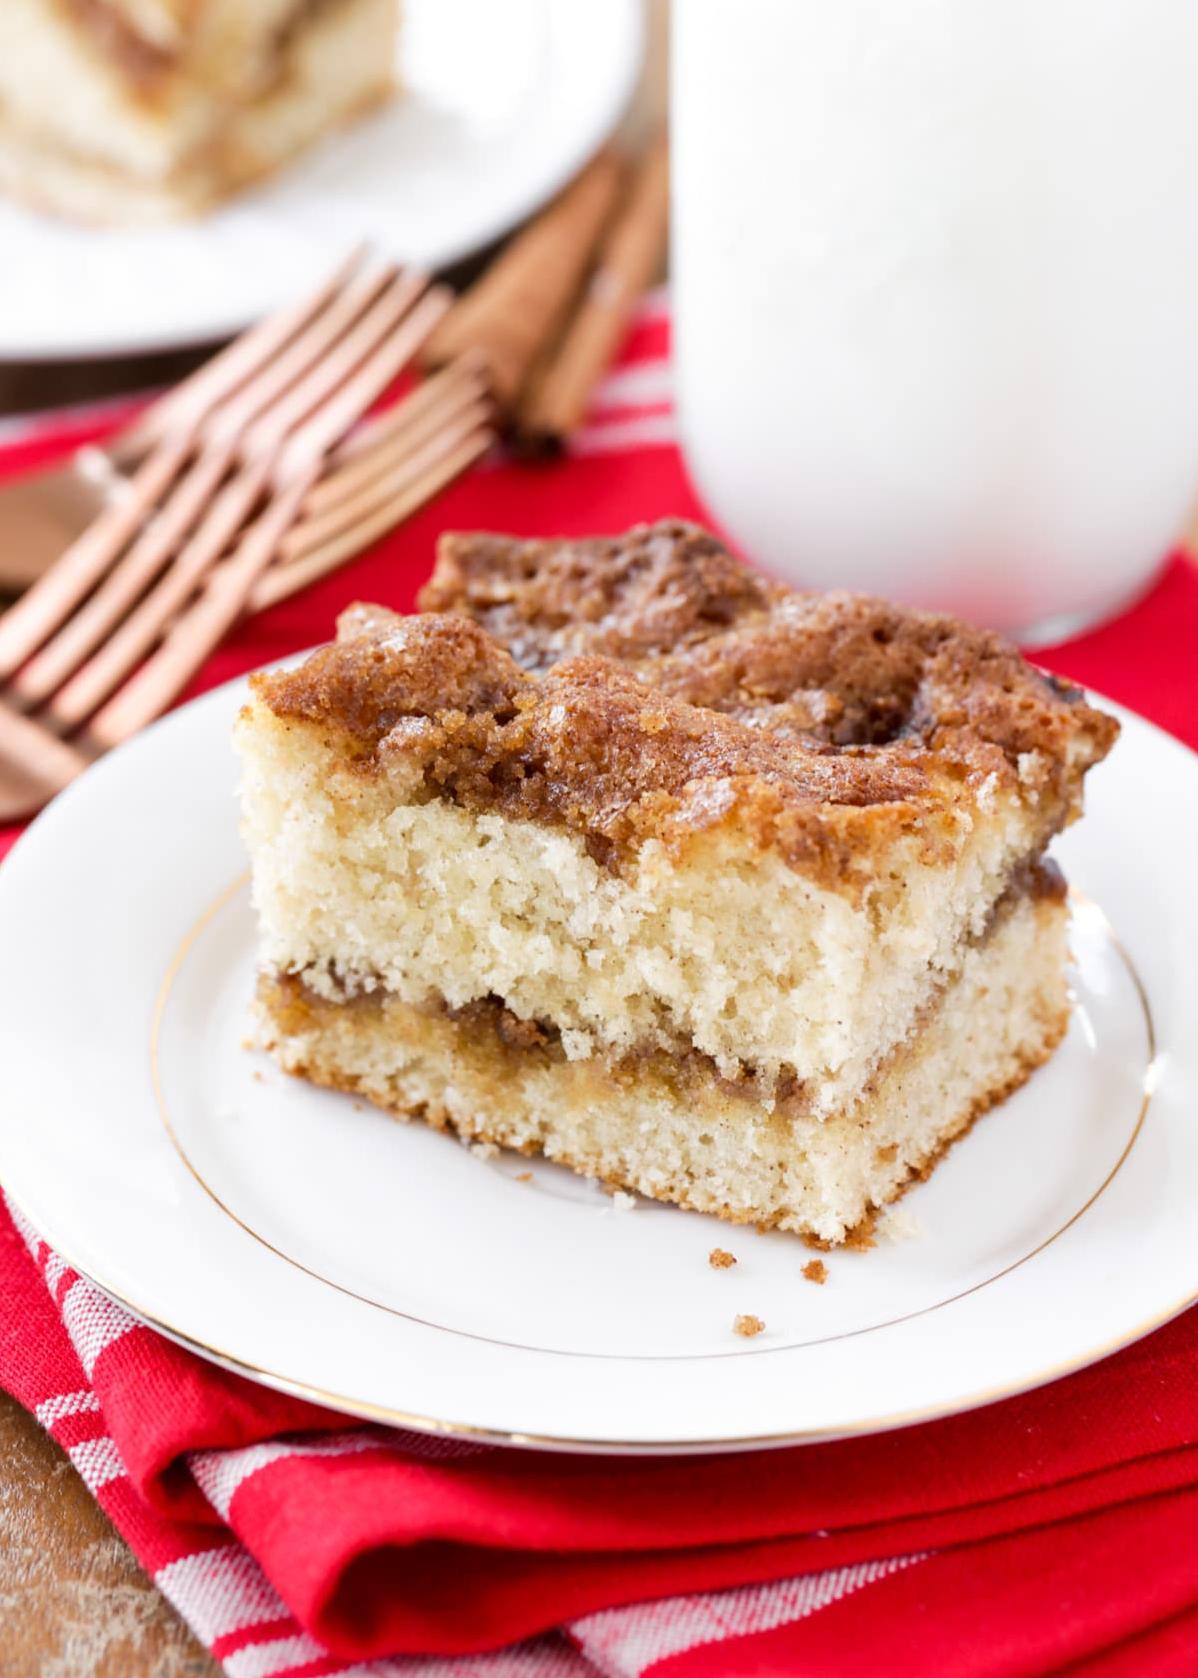  Start your day with a slice of this delectable coffee cake!